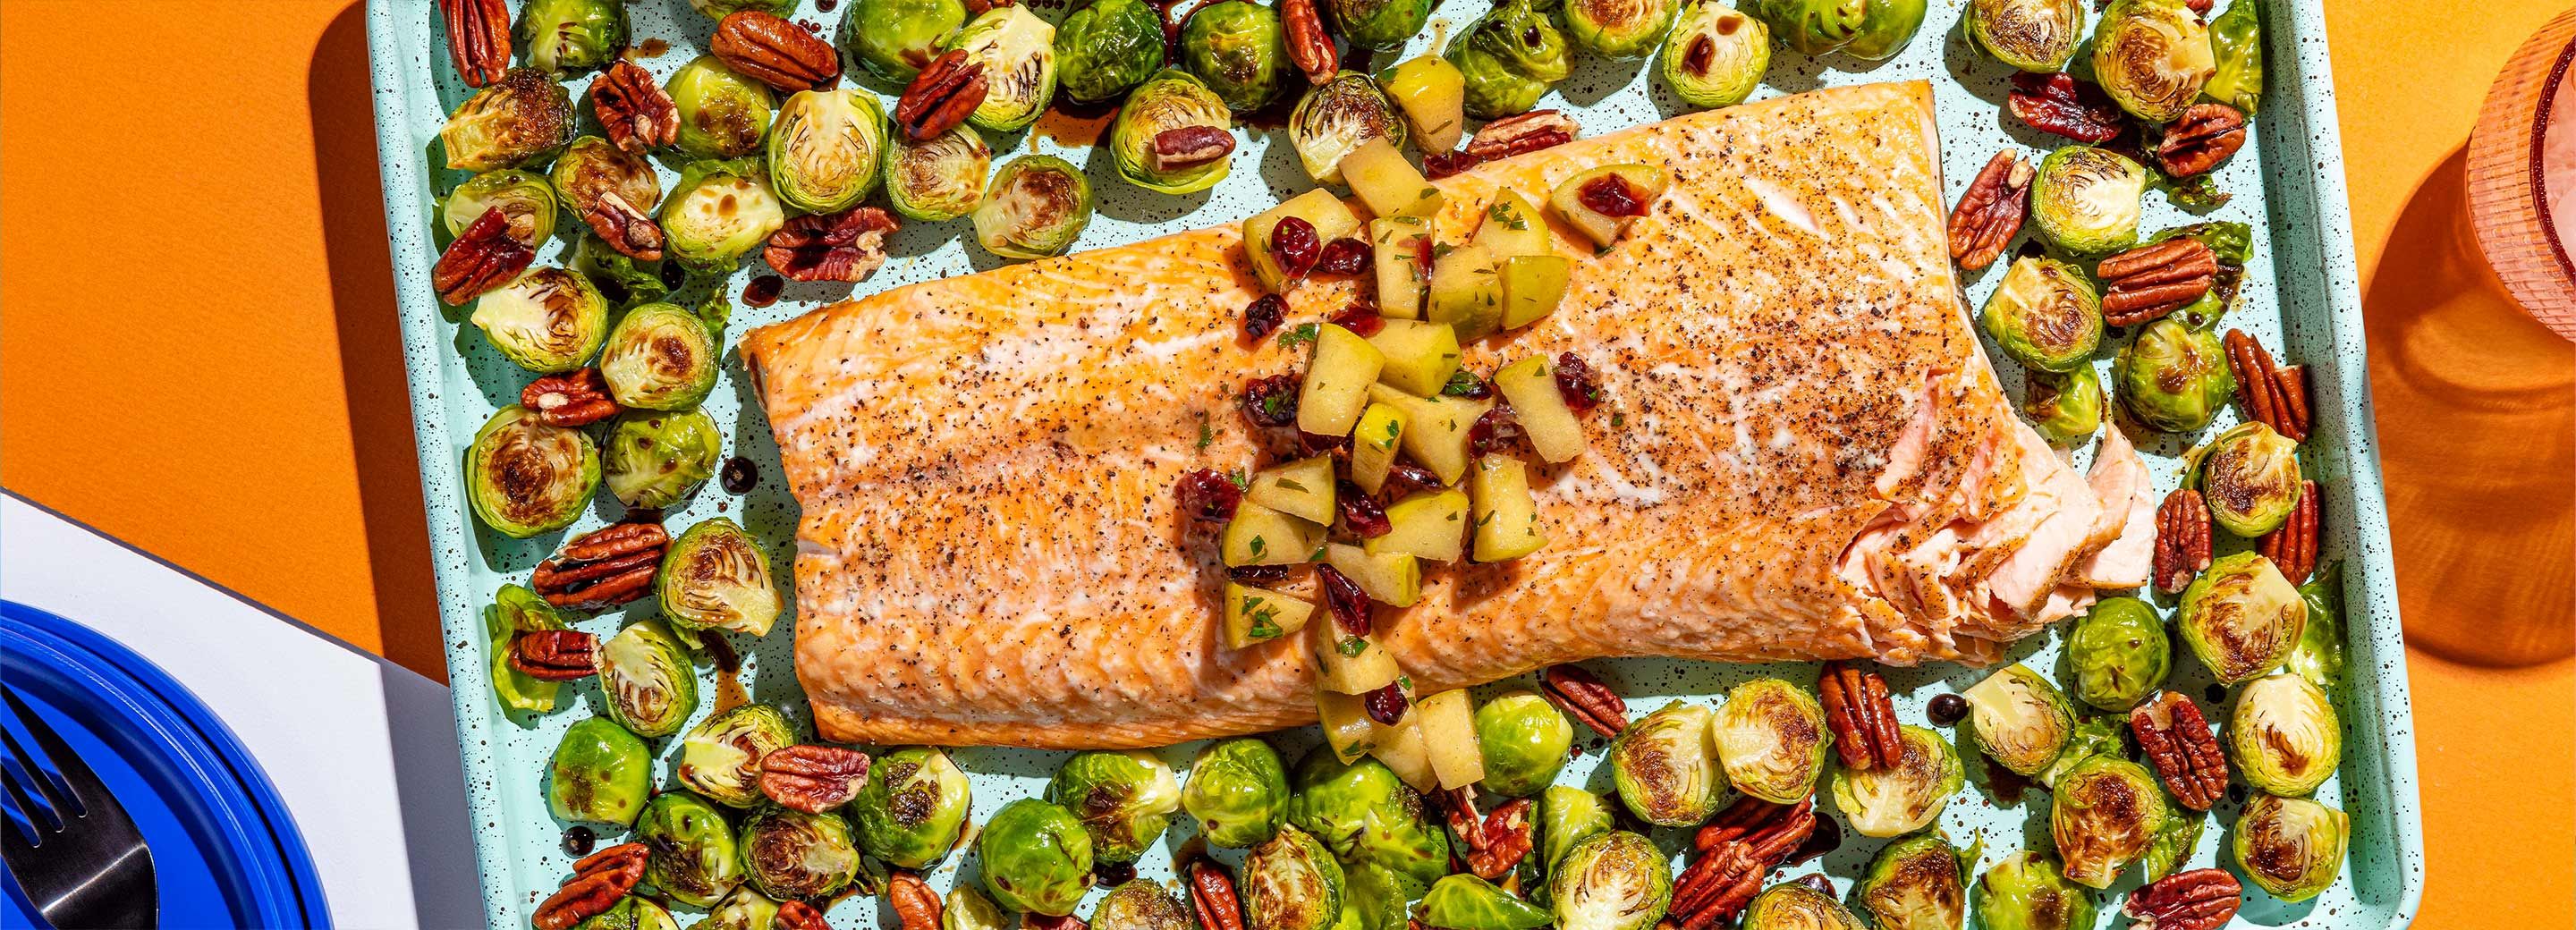 Sheet-Pan Salmon with Maple Pecan Brussels Sprouts and Cran-Apple Brown Butter